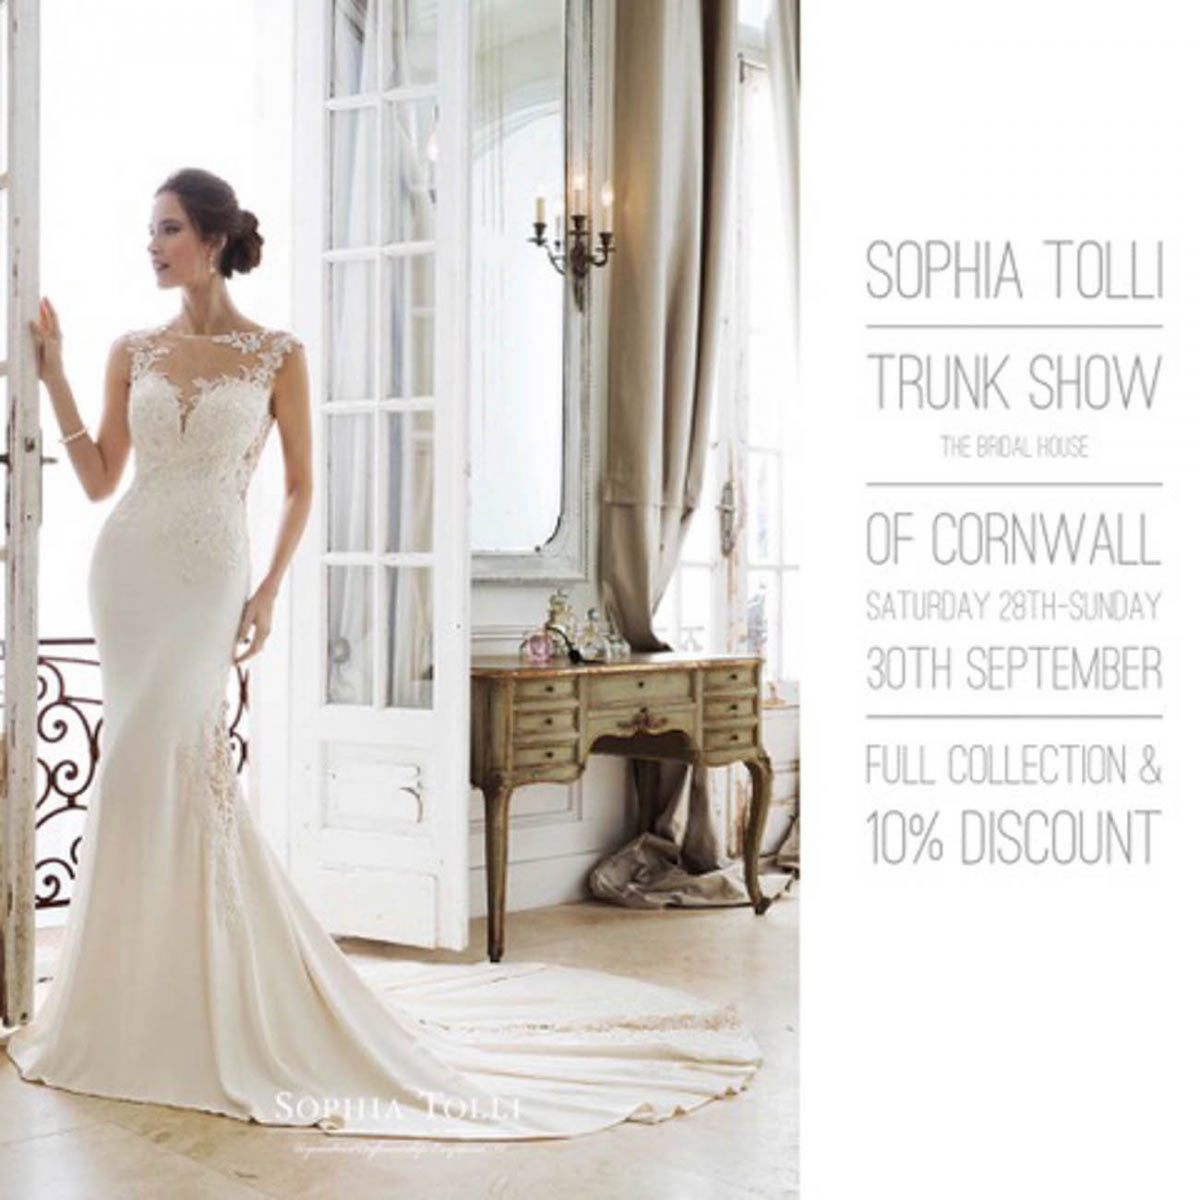 Sophia Tolli trunk show at The Bridal House of Cornwall